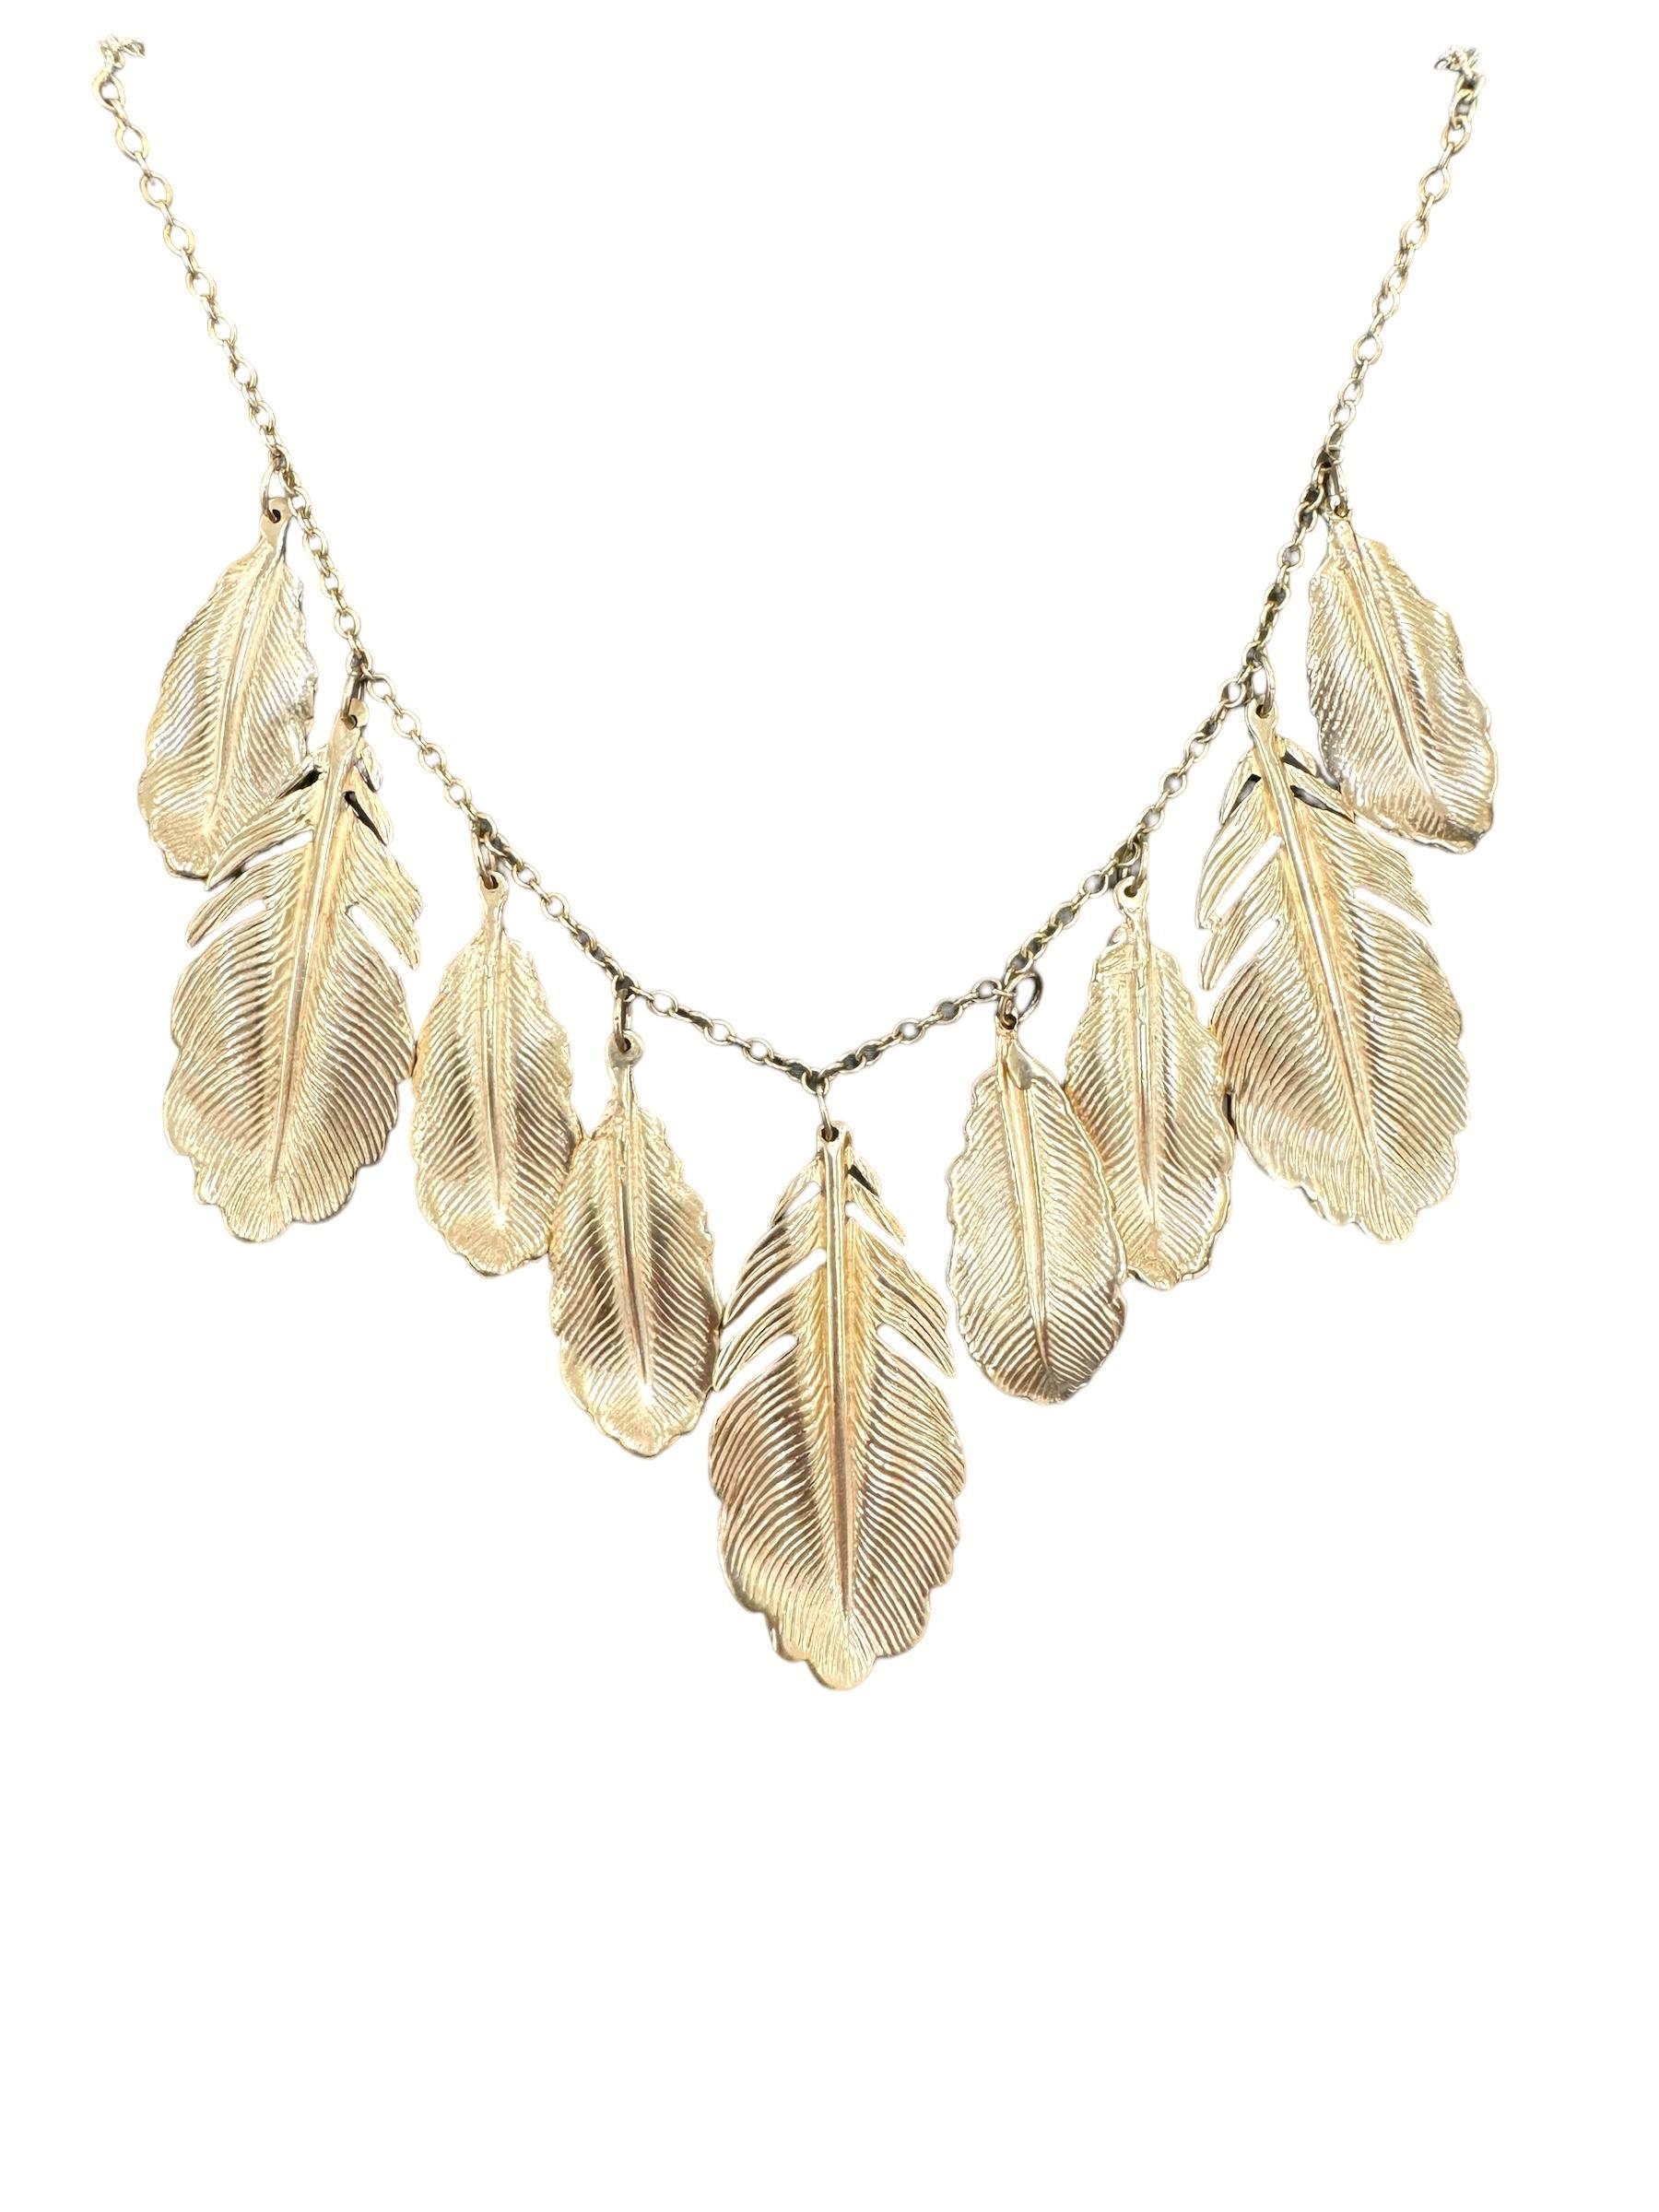 Contemporary Estate 14K Yellow Gold Feather Necklace 24 Inches 2